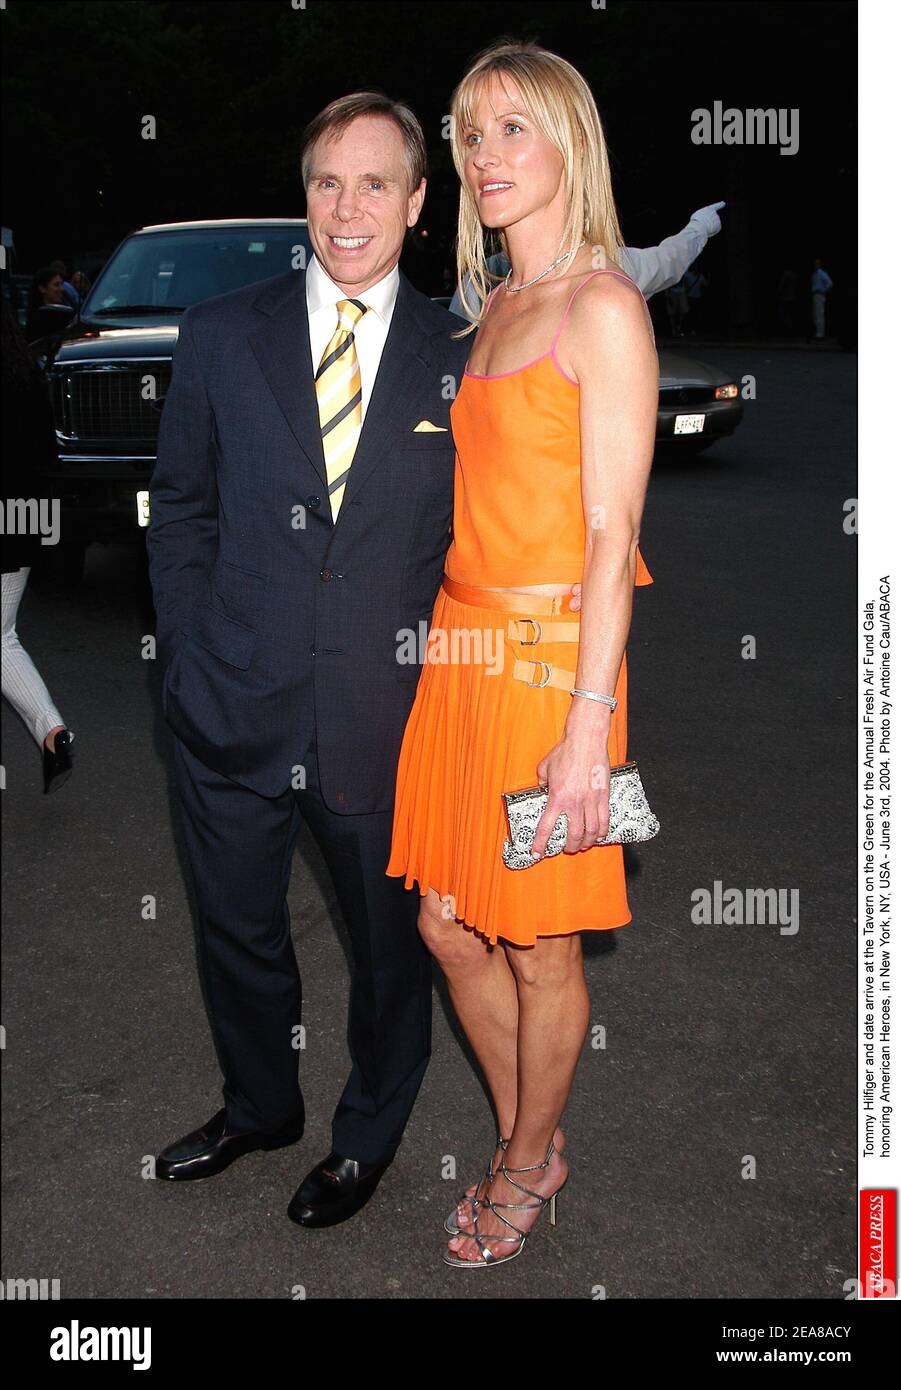 Tommy Hilfiger and girlfriend Lizzie Somerby arrive at the Tavern on the  Green for the Annual Fresh Air Fund Gala, honoring American Heroes, in New  York, NY, USA - June 3rd, 2004.